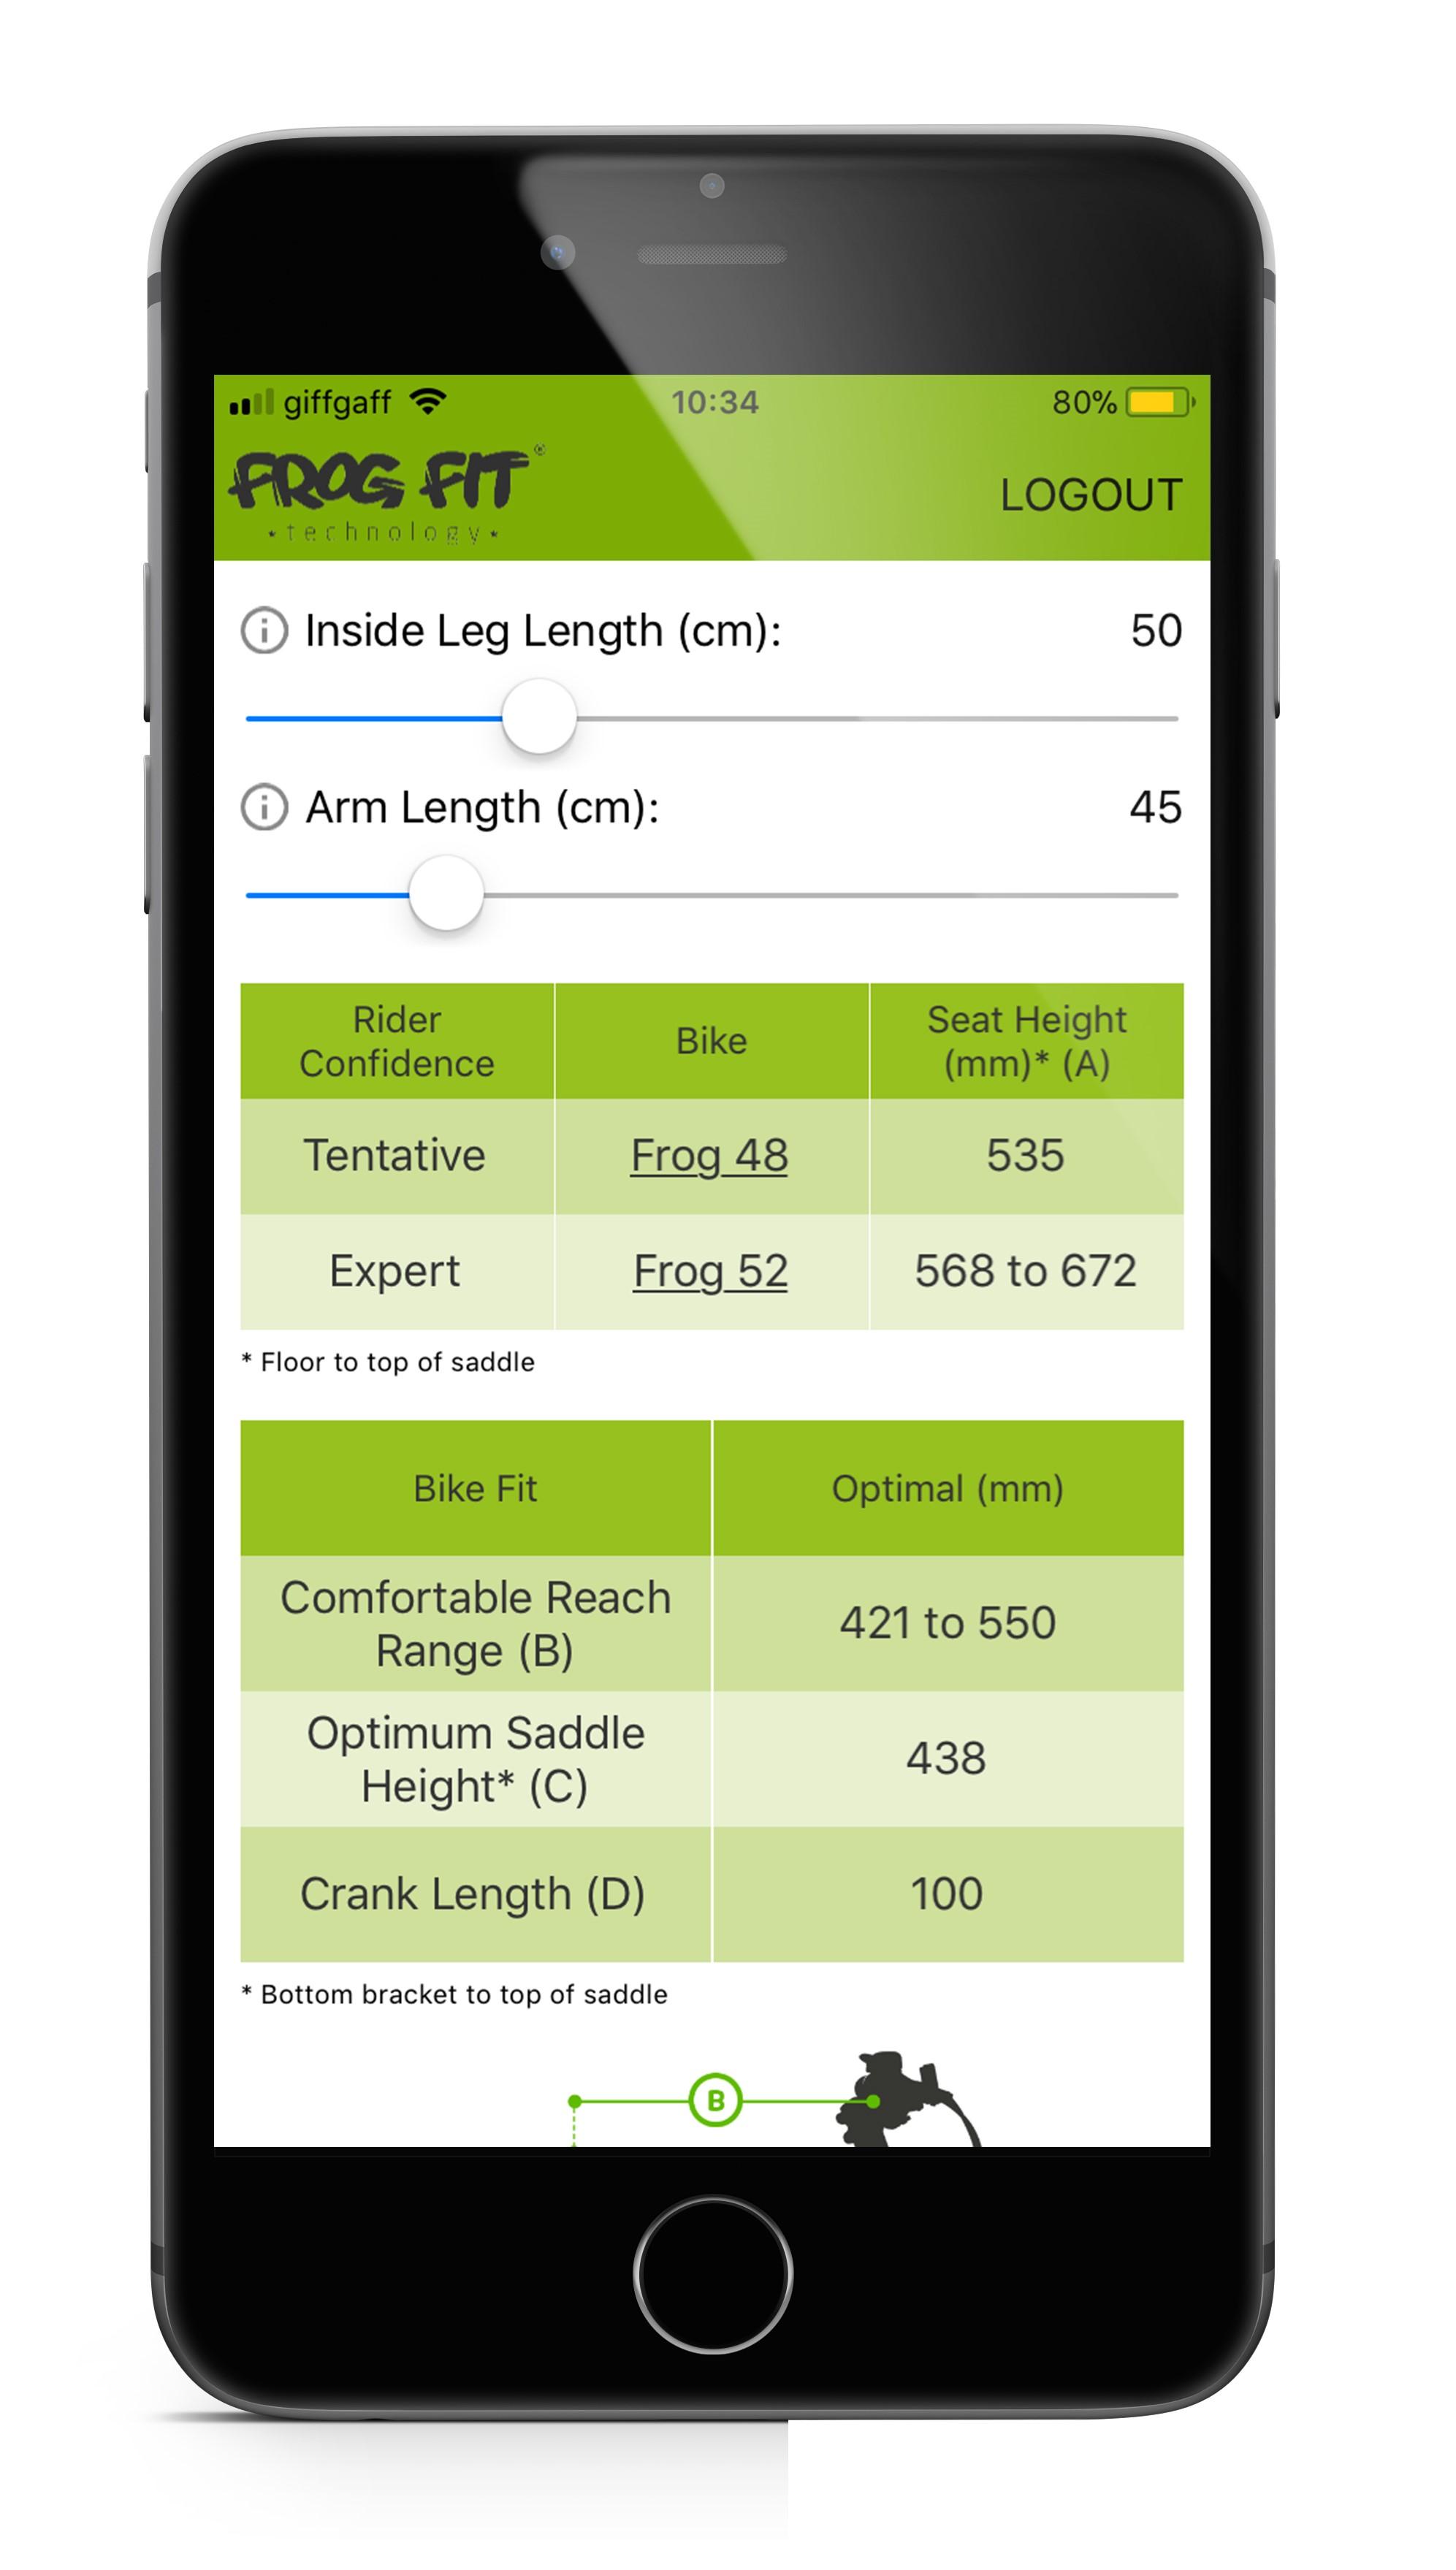  image of an iPhone showing the frogfit app on the screen